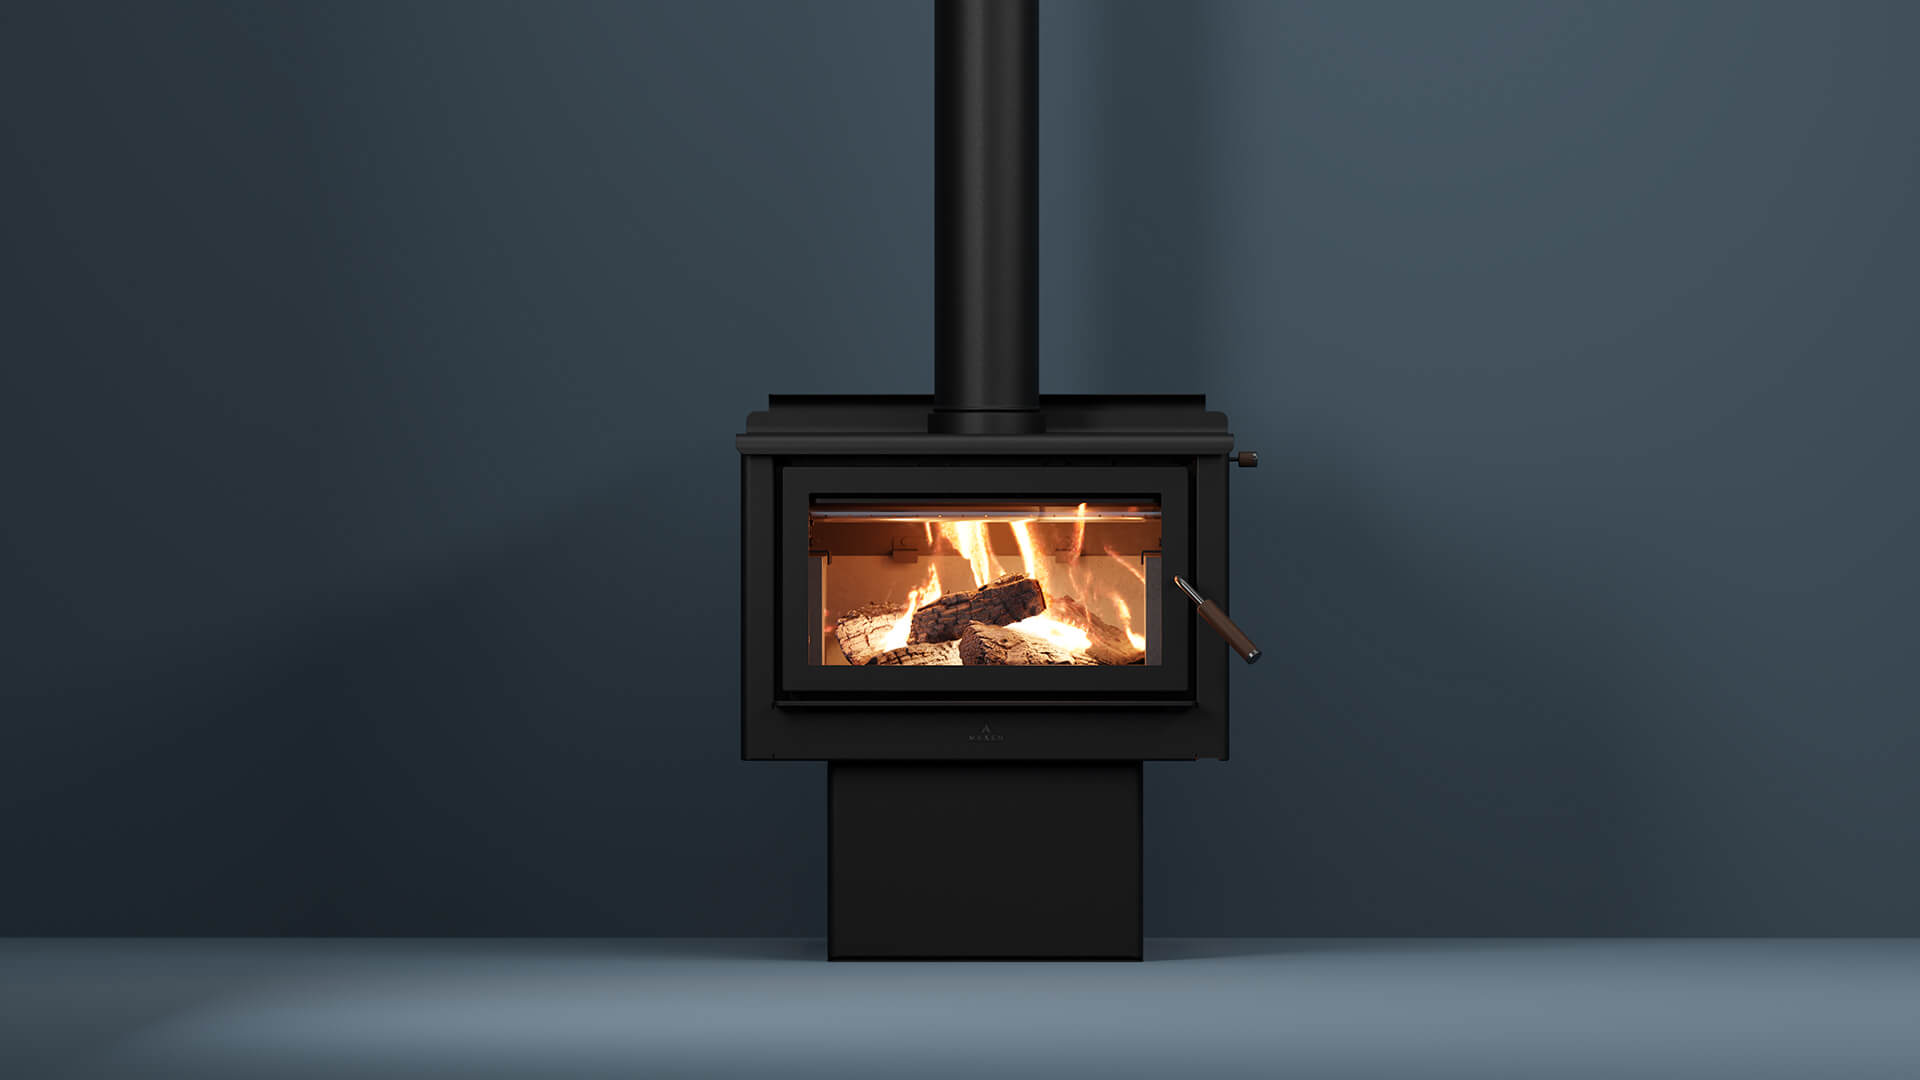 Maxen Kinmont 450 with Pedestal Base Wood Fireplace in navy coloured room